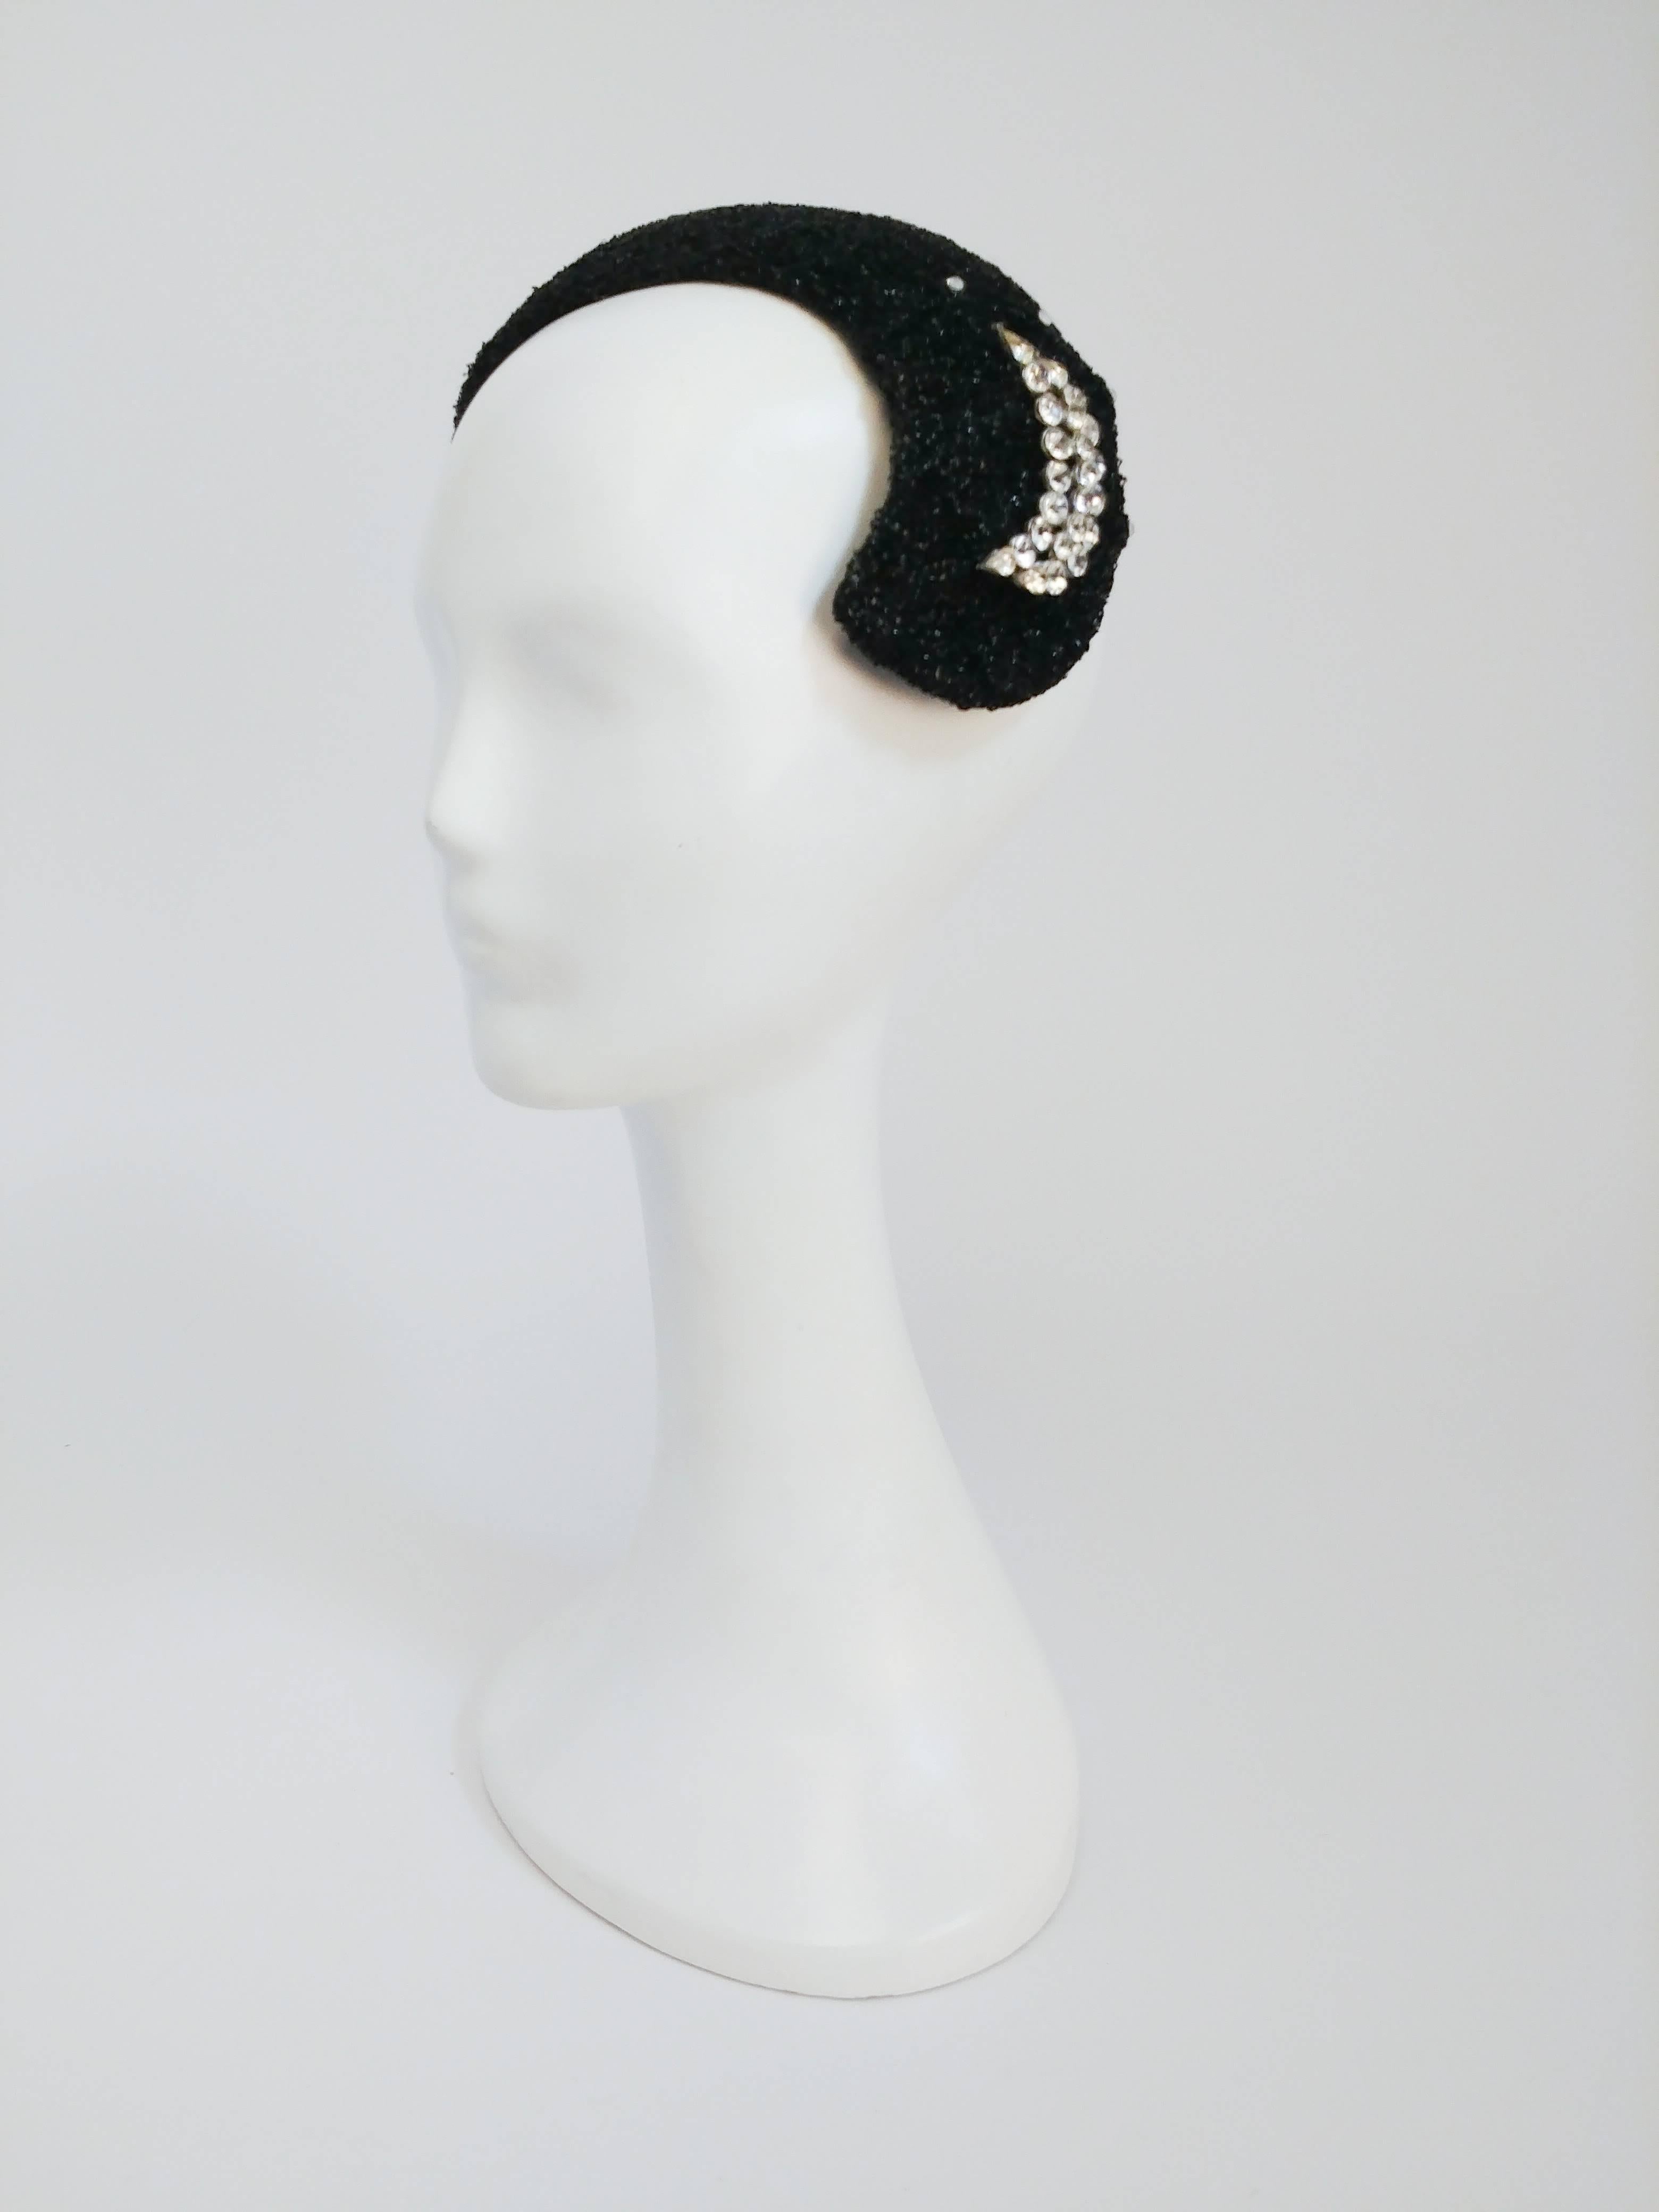 1950s Black I. Magnin Cocktail Hat with Rhinestone Crescent Moon. Black shiny raffia weave cocktail hat with clear rhinestone embellishments and crescent moon. Open sized. 